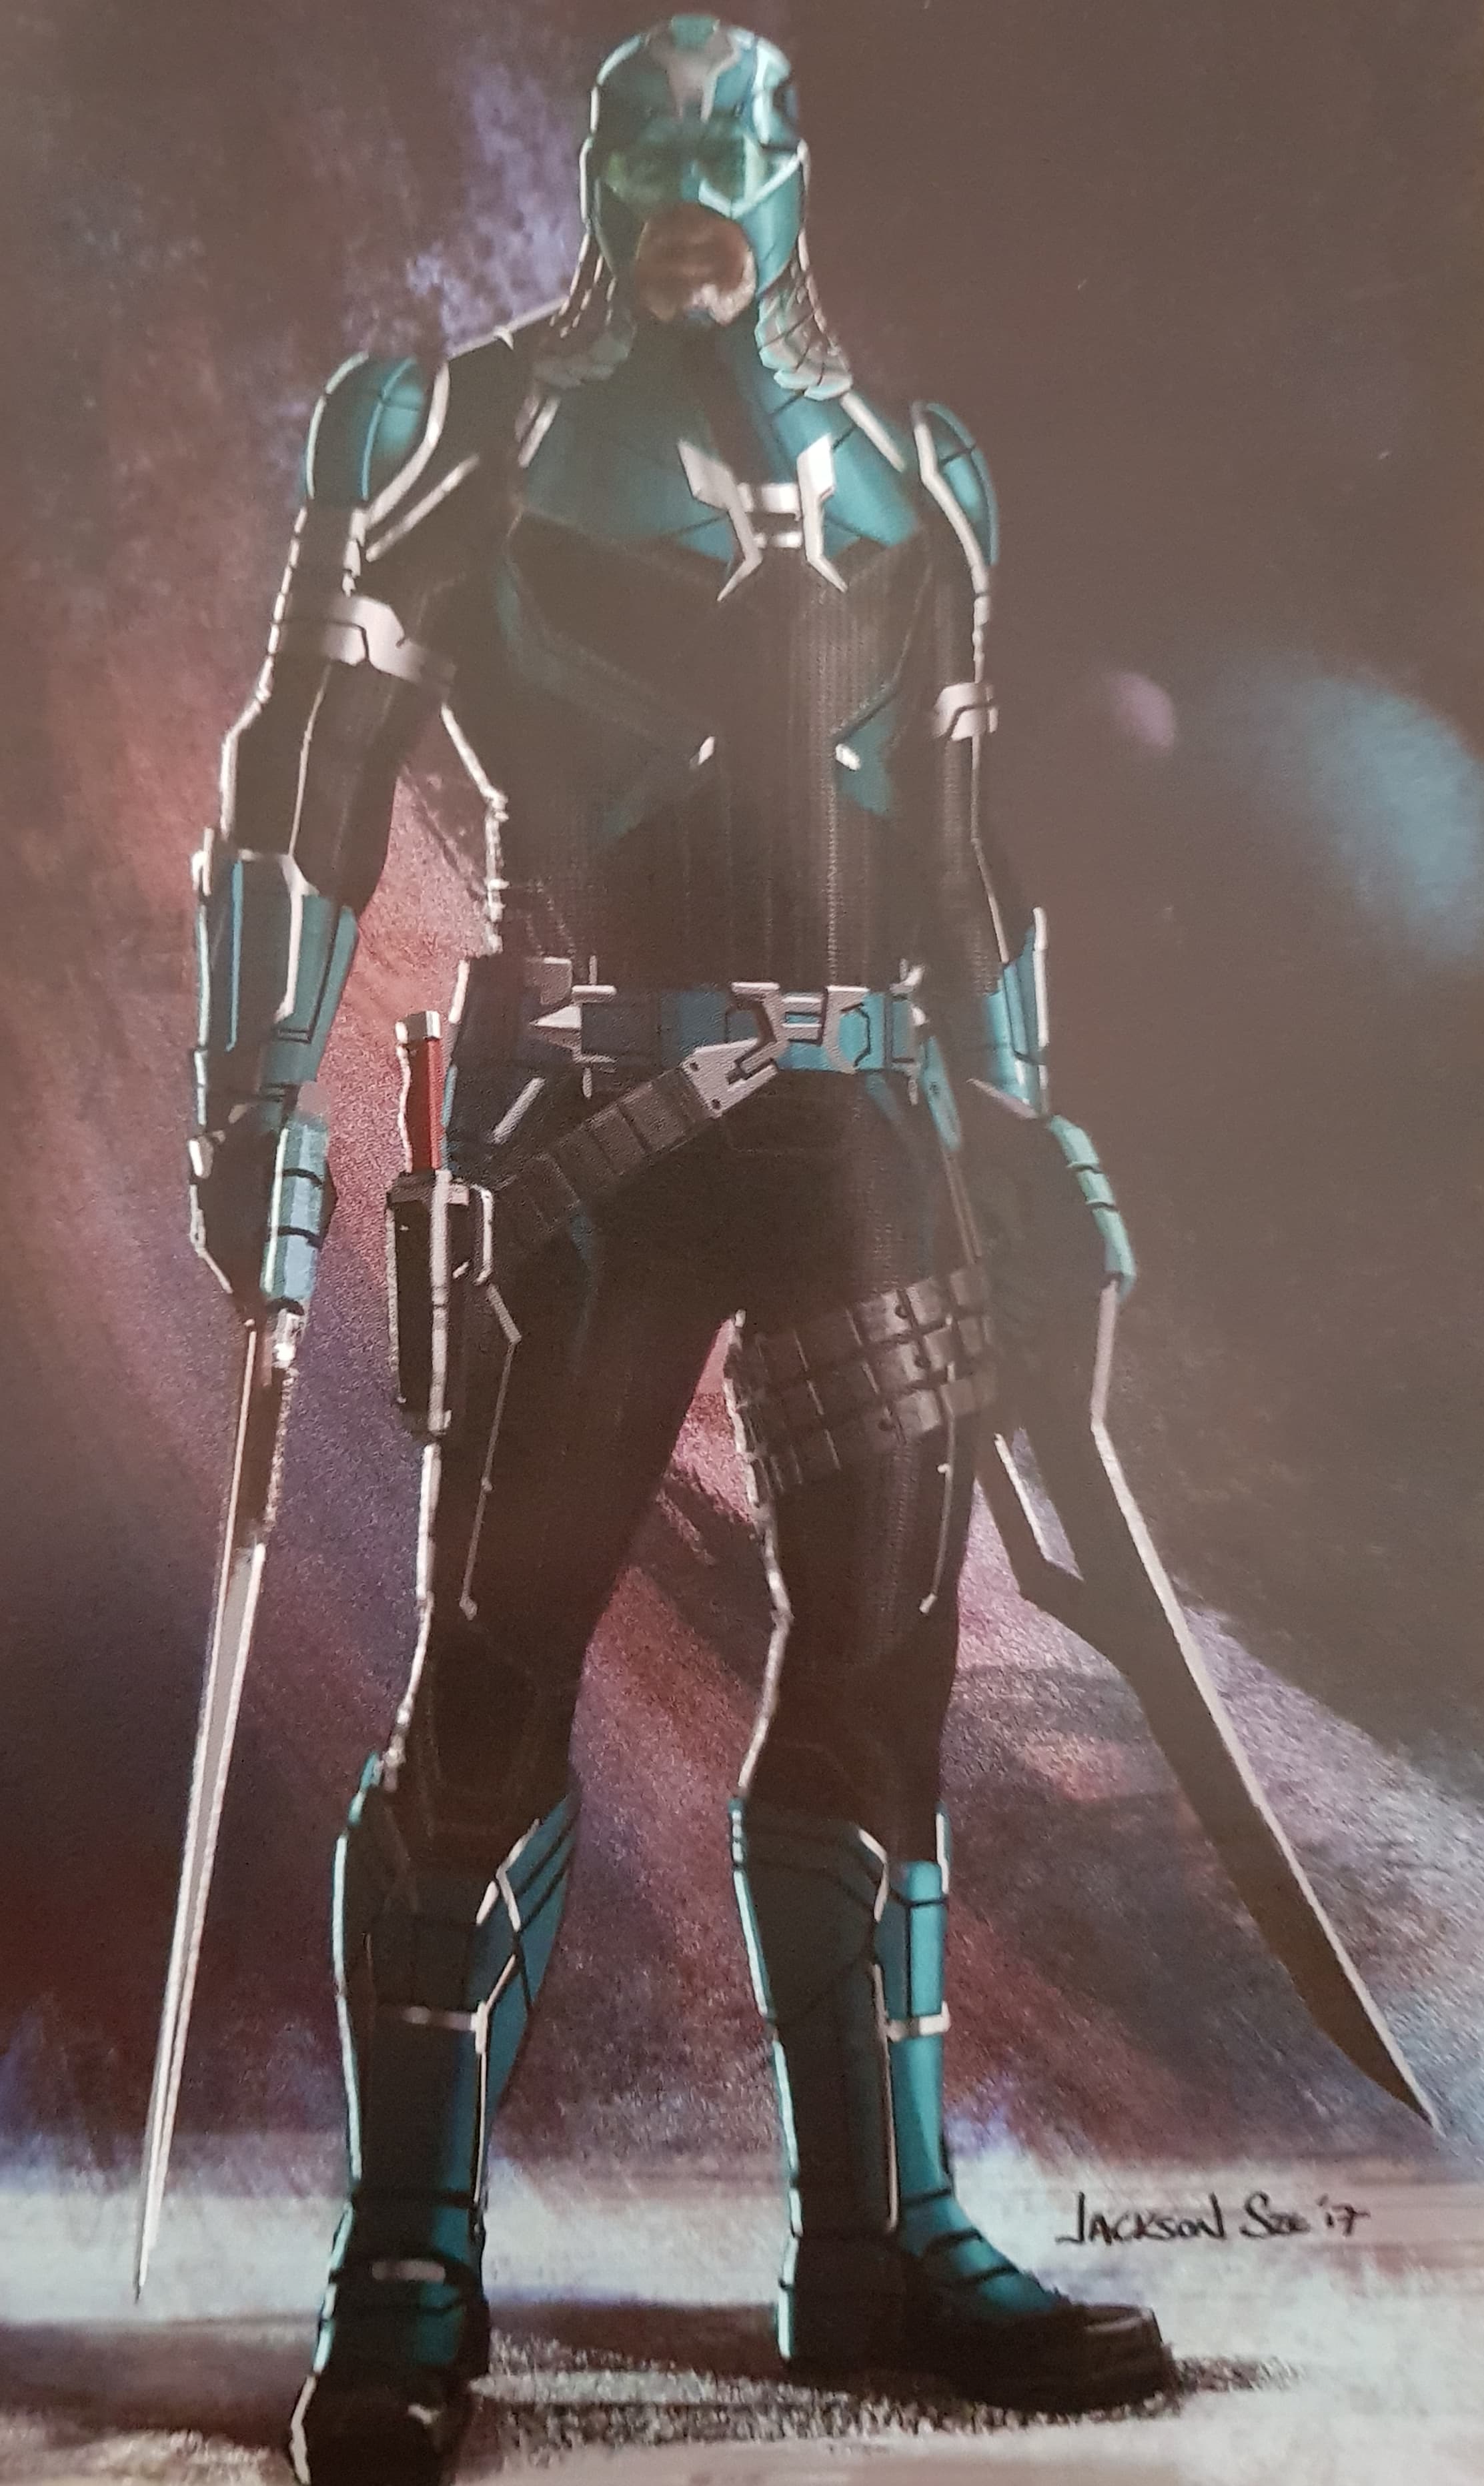 CAPTAIN MARVEL: Check Out These Amazing Alternate Designs For Ronan The